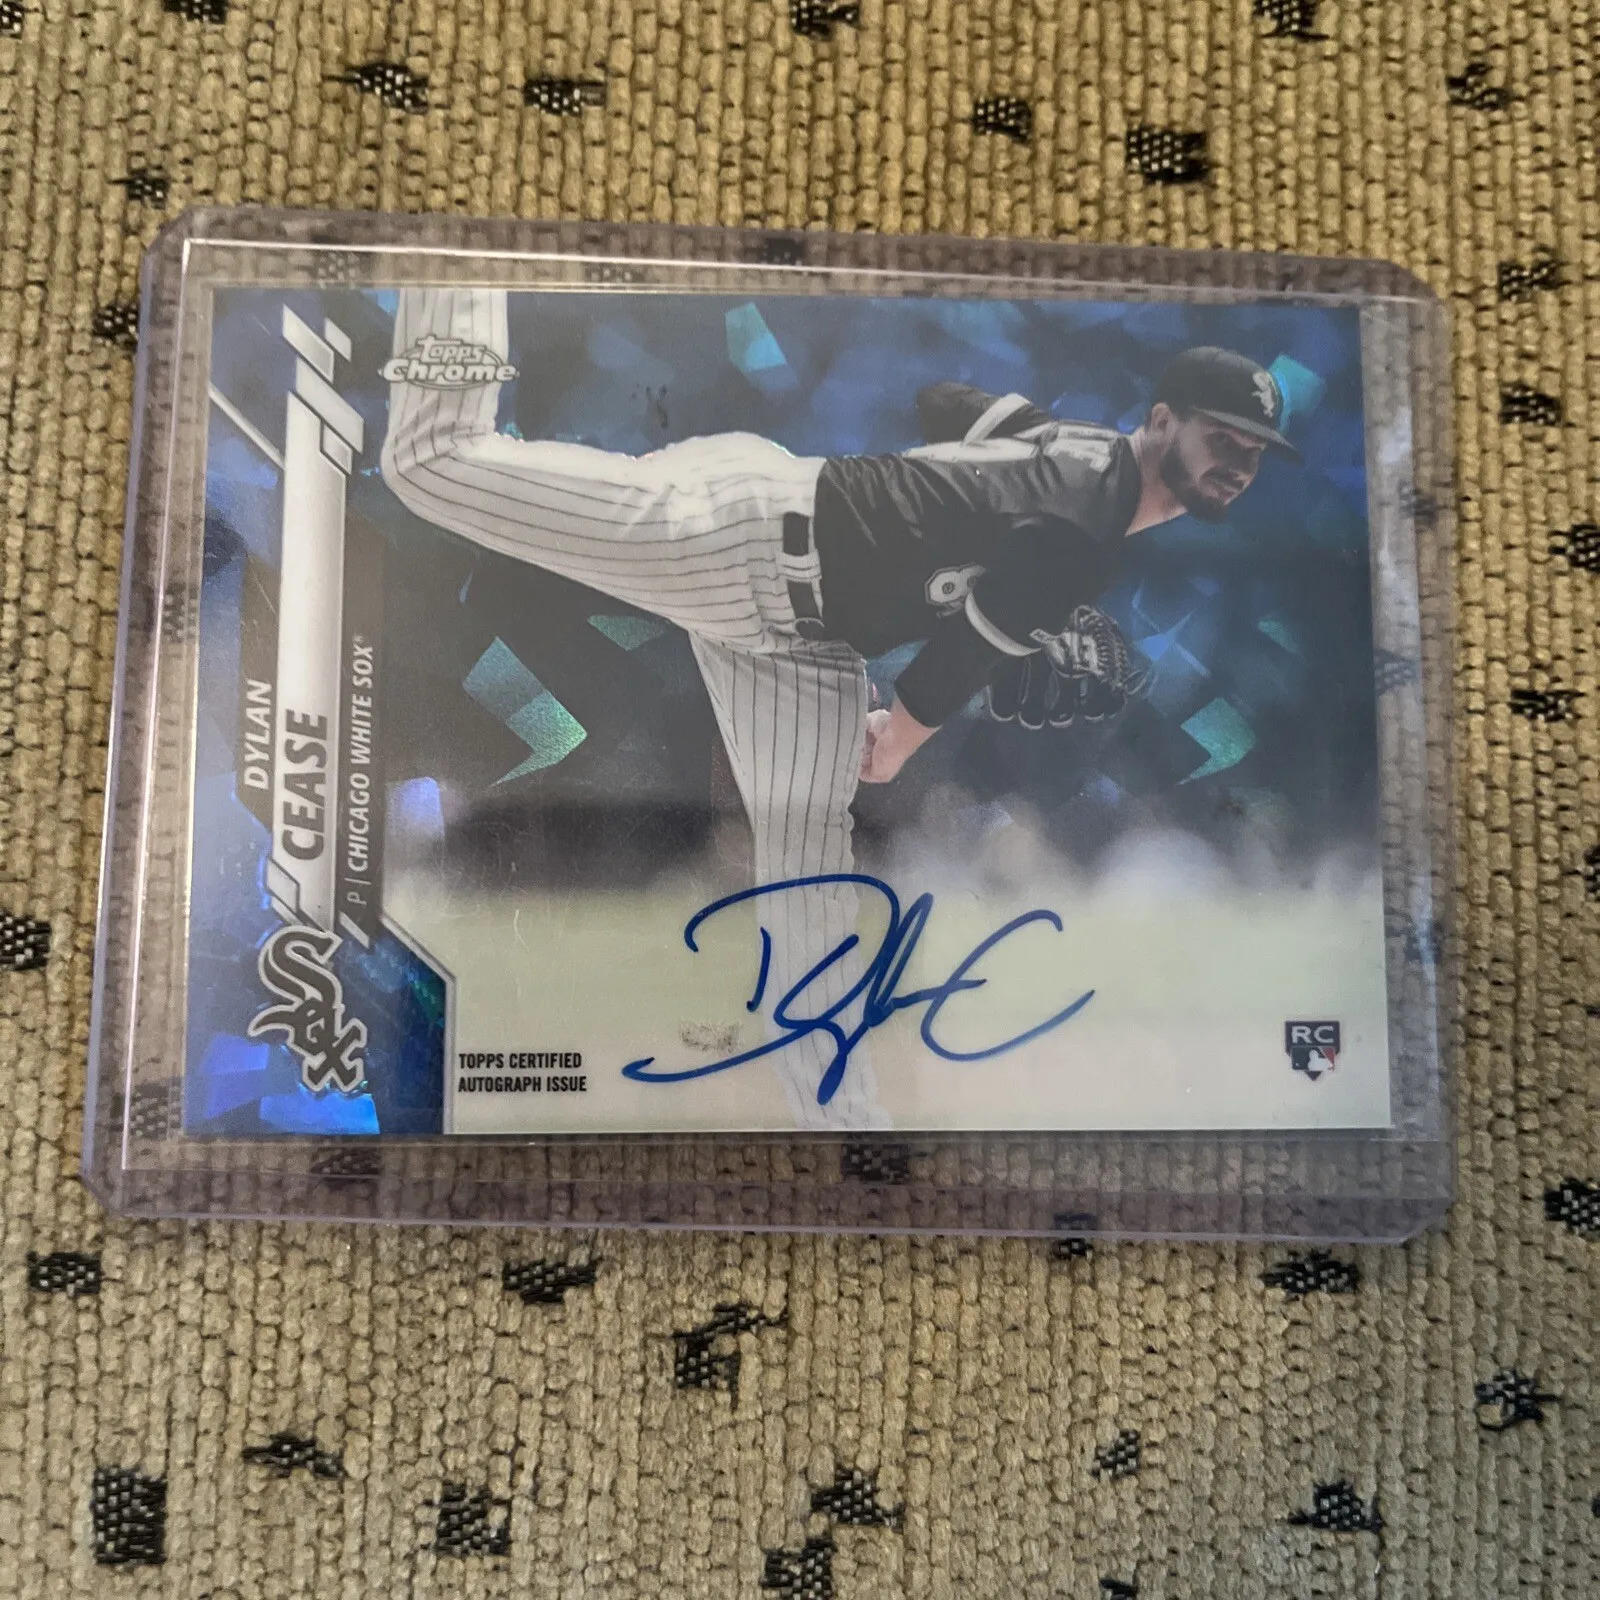 2020 Topps Chrome Sapphire Autograph Dylan Cease